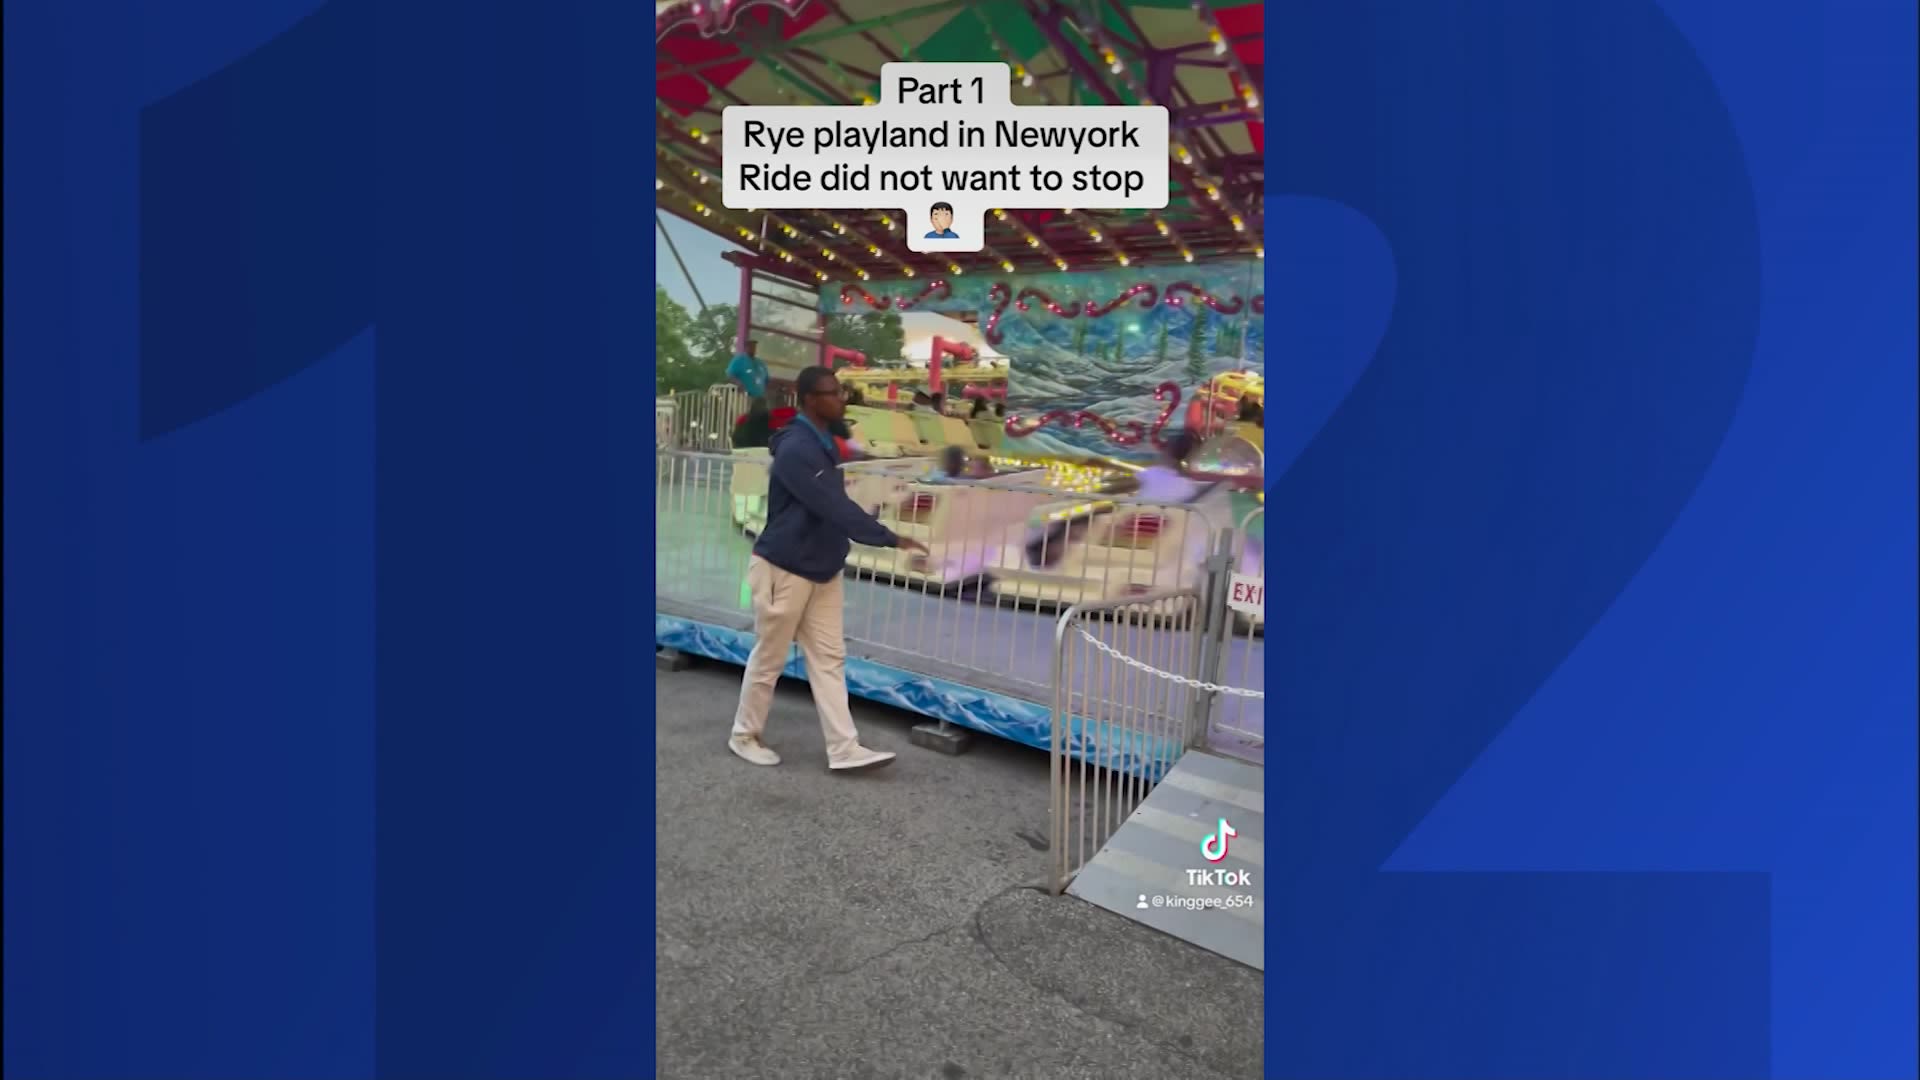 Malfunction on Music Express ride at Rye Playland raises safety concerns